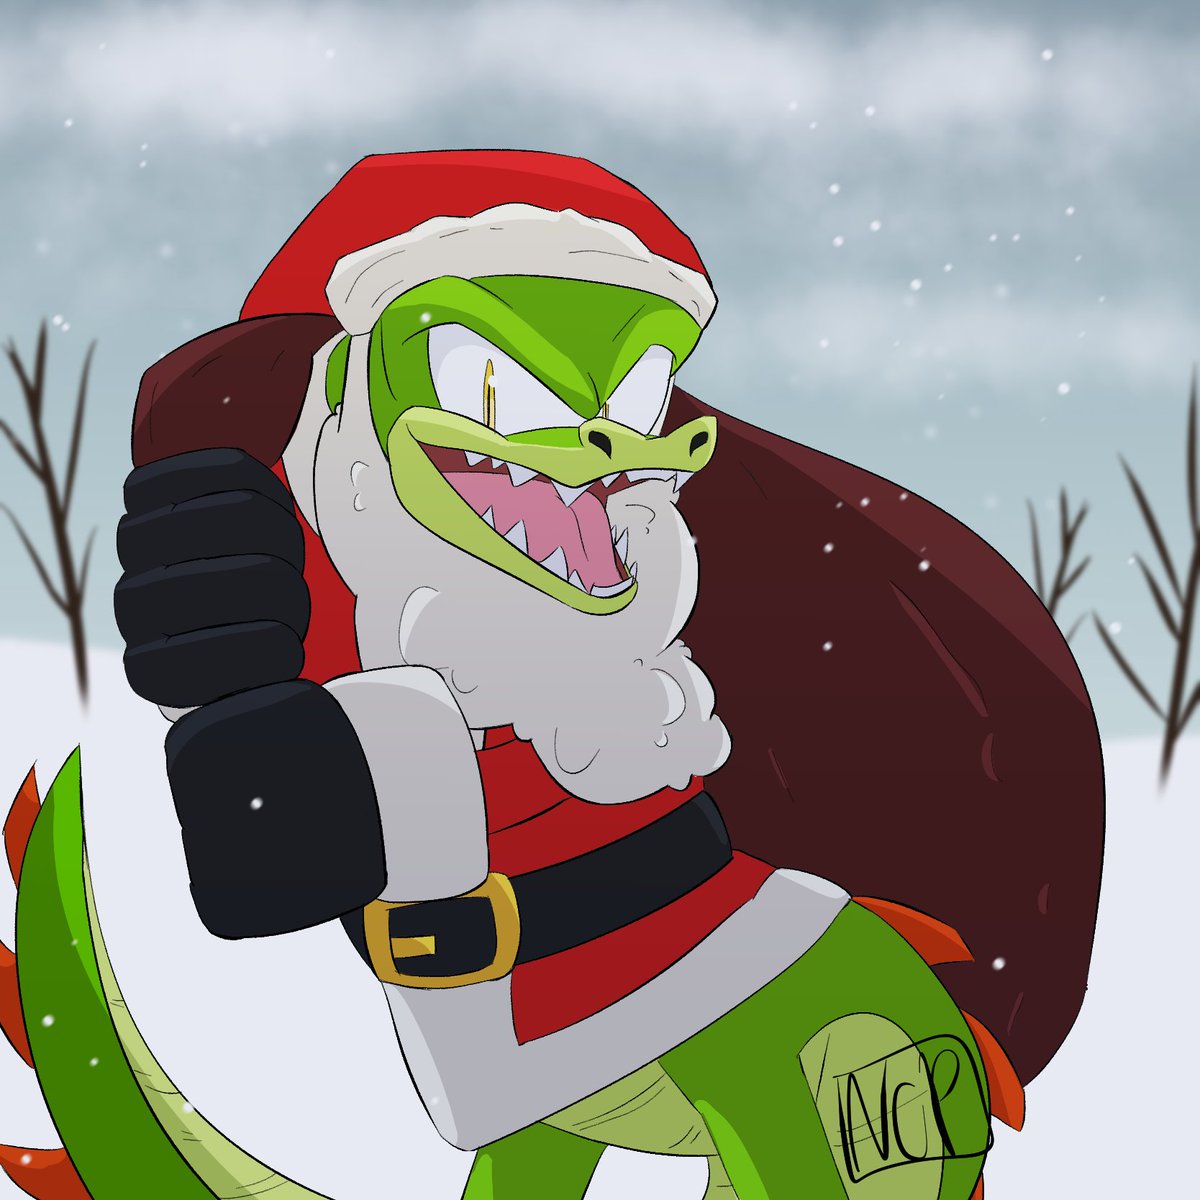 Merry Christmas/Happy Holidays @starlightseq !! Hope you enjoy Santa Vector and had a wonderful holiday!! :DD

This was actually my first time drawing Vector too so I had a lot of fun with this 
#Sonic_SecretSanta2022 #SonicTheHedgehog #vector #sonicfanart